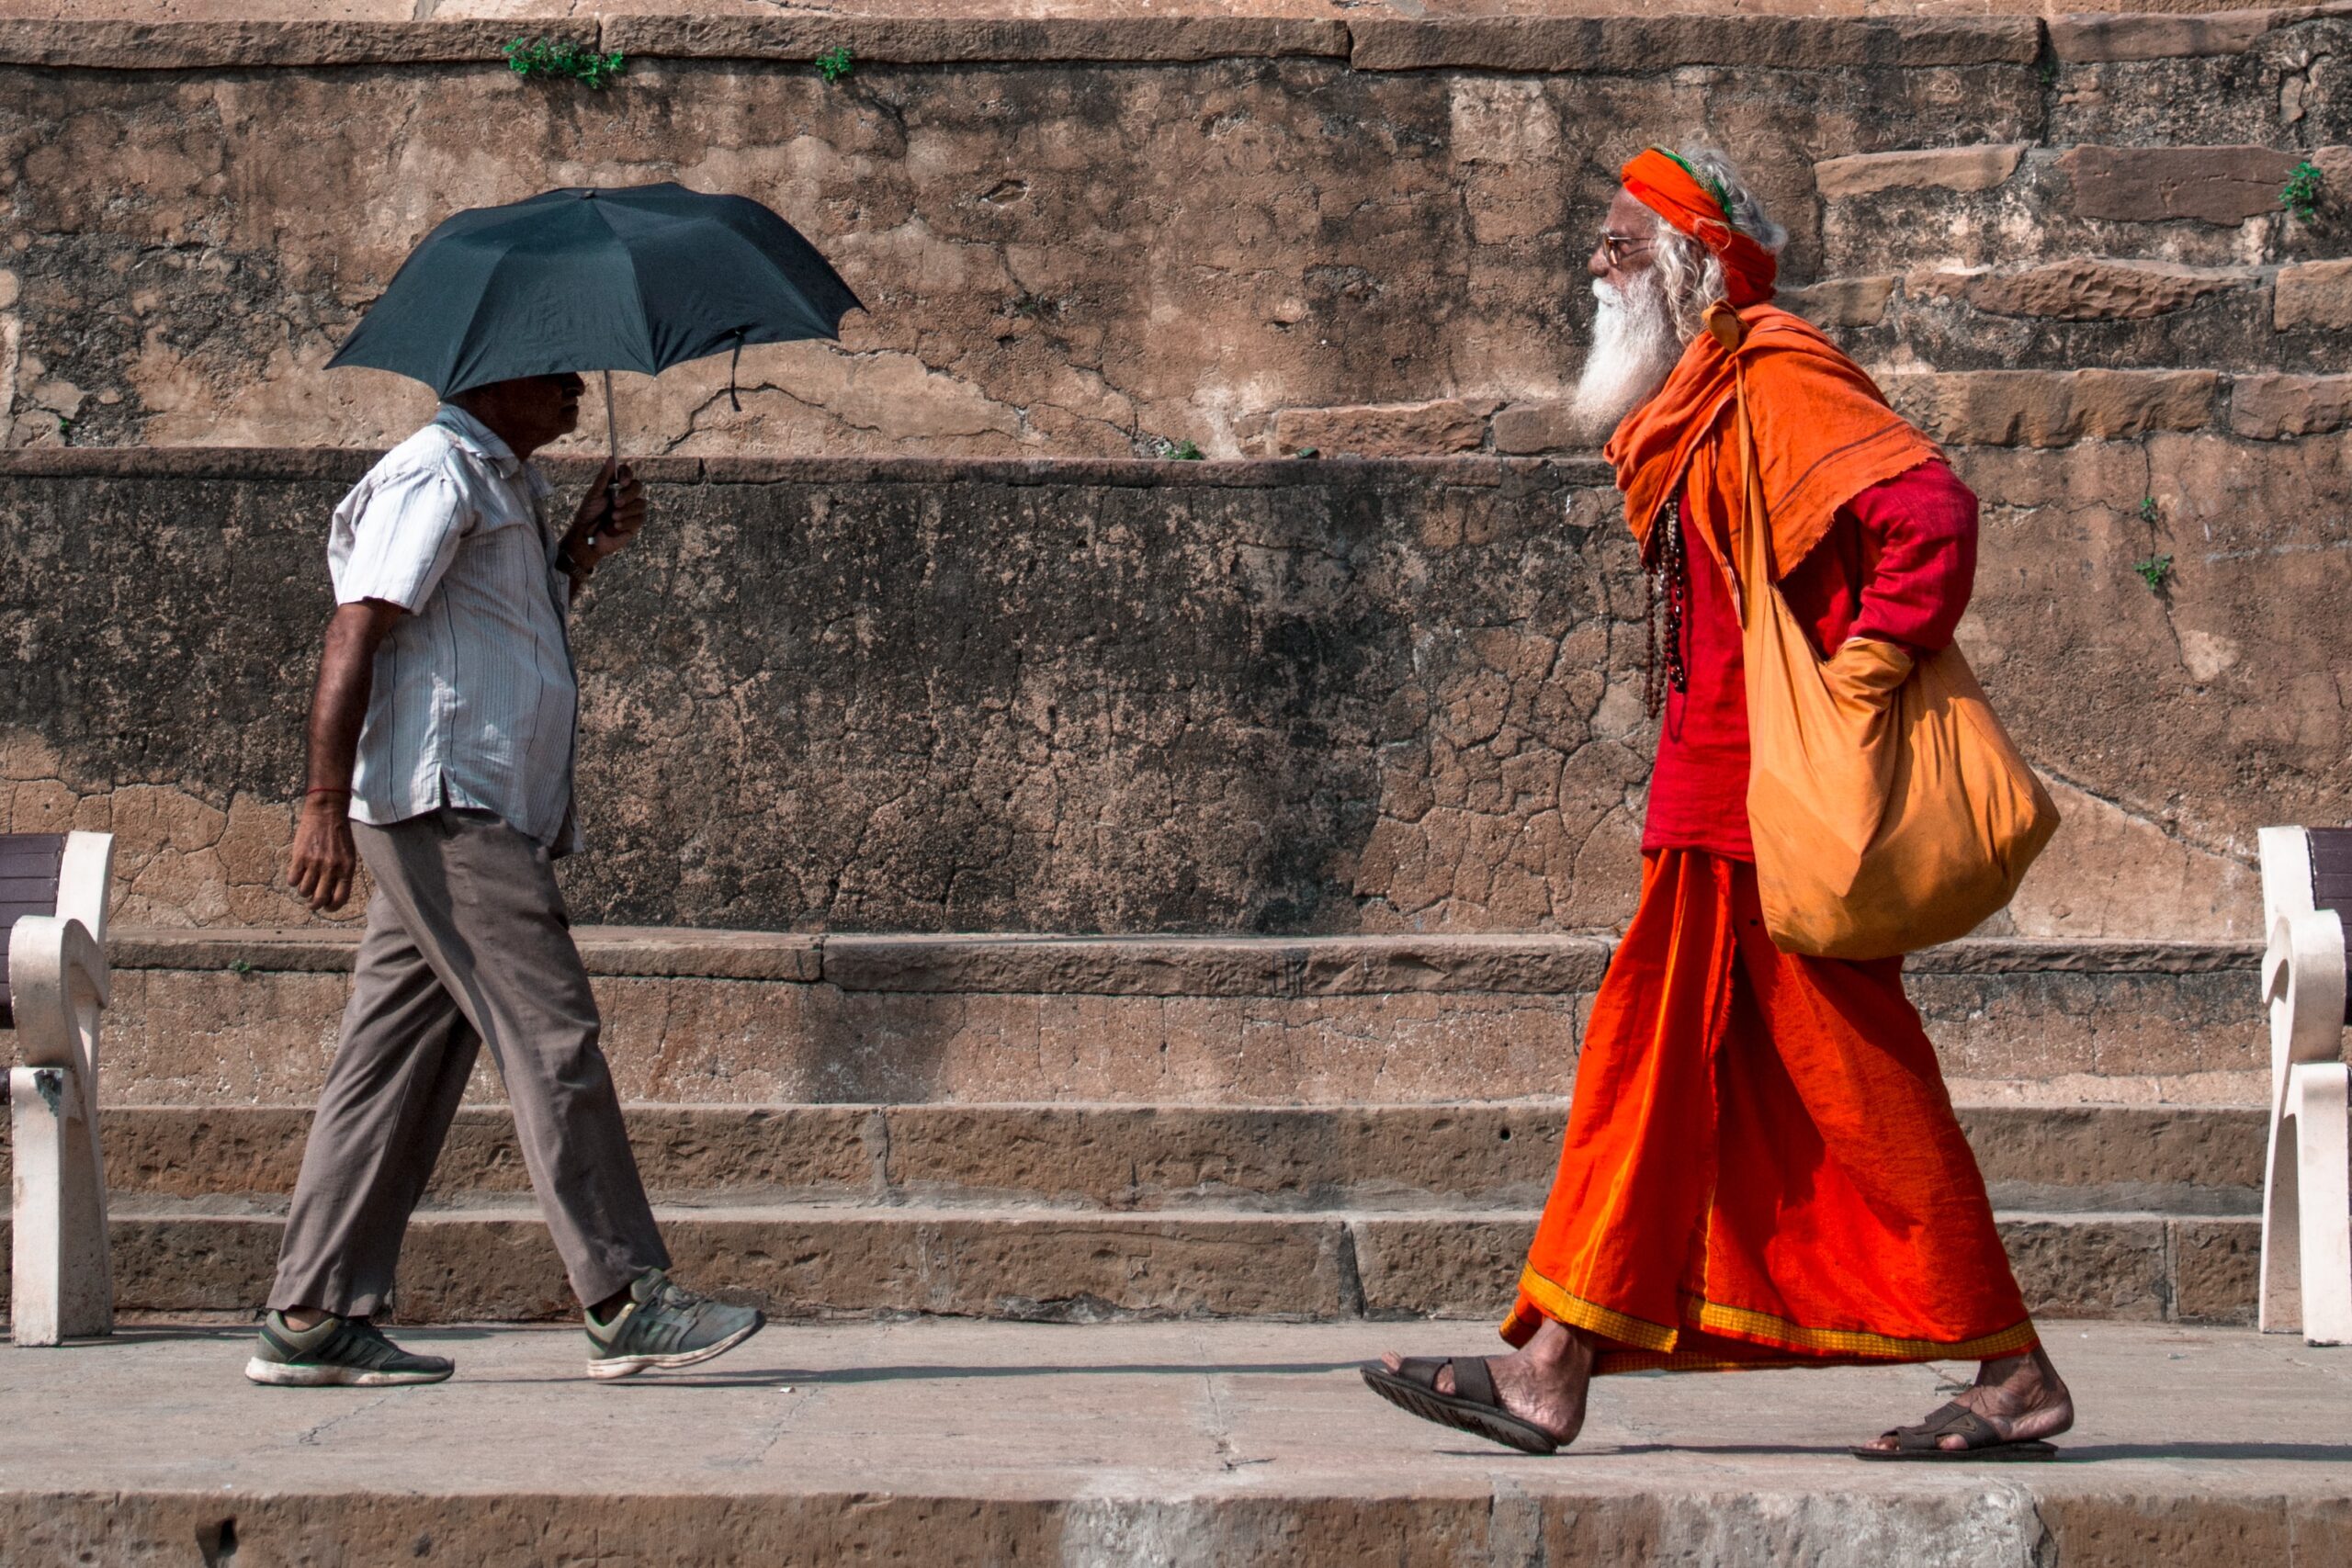 Two men walk past each other in India. One man wears a pants and shirts and holds an umbrella and the other man wears orange robes.